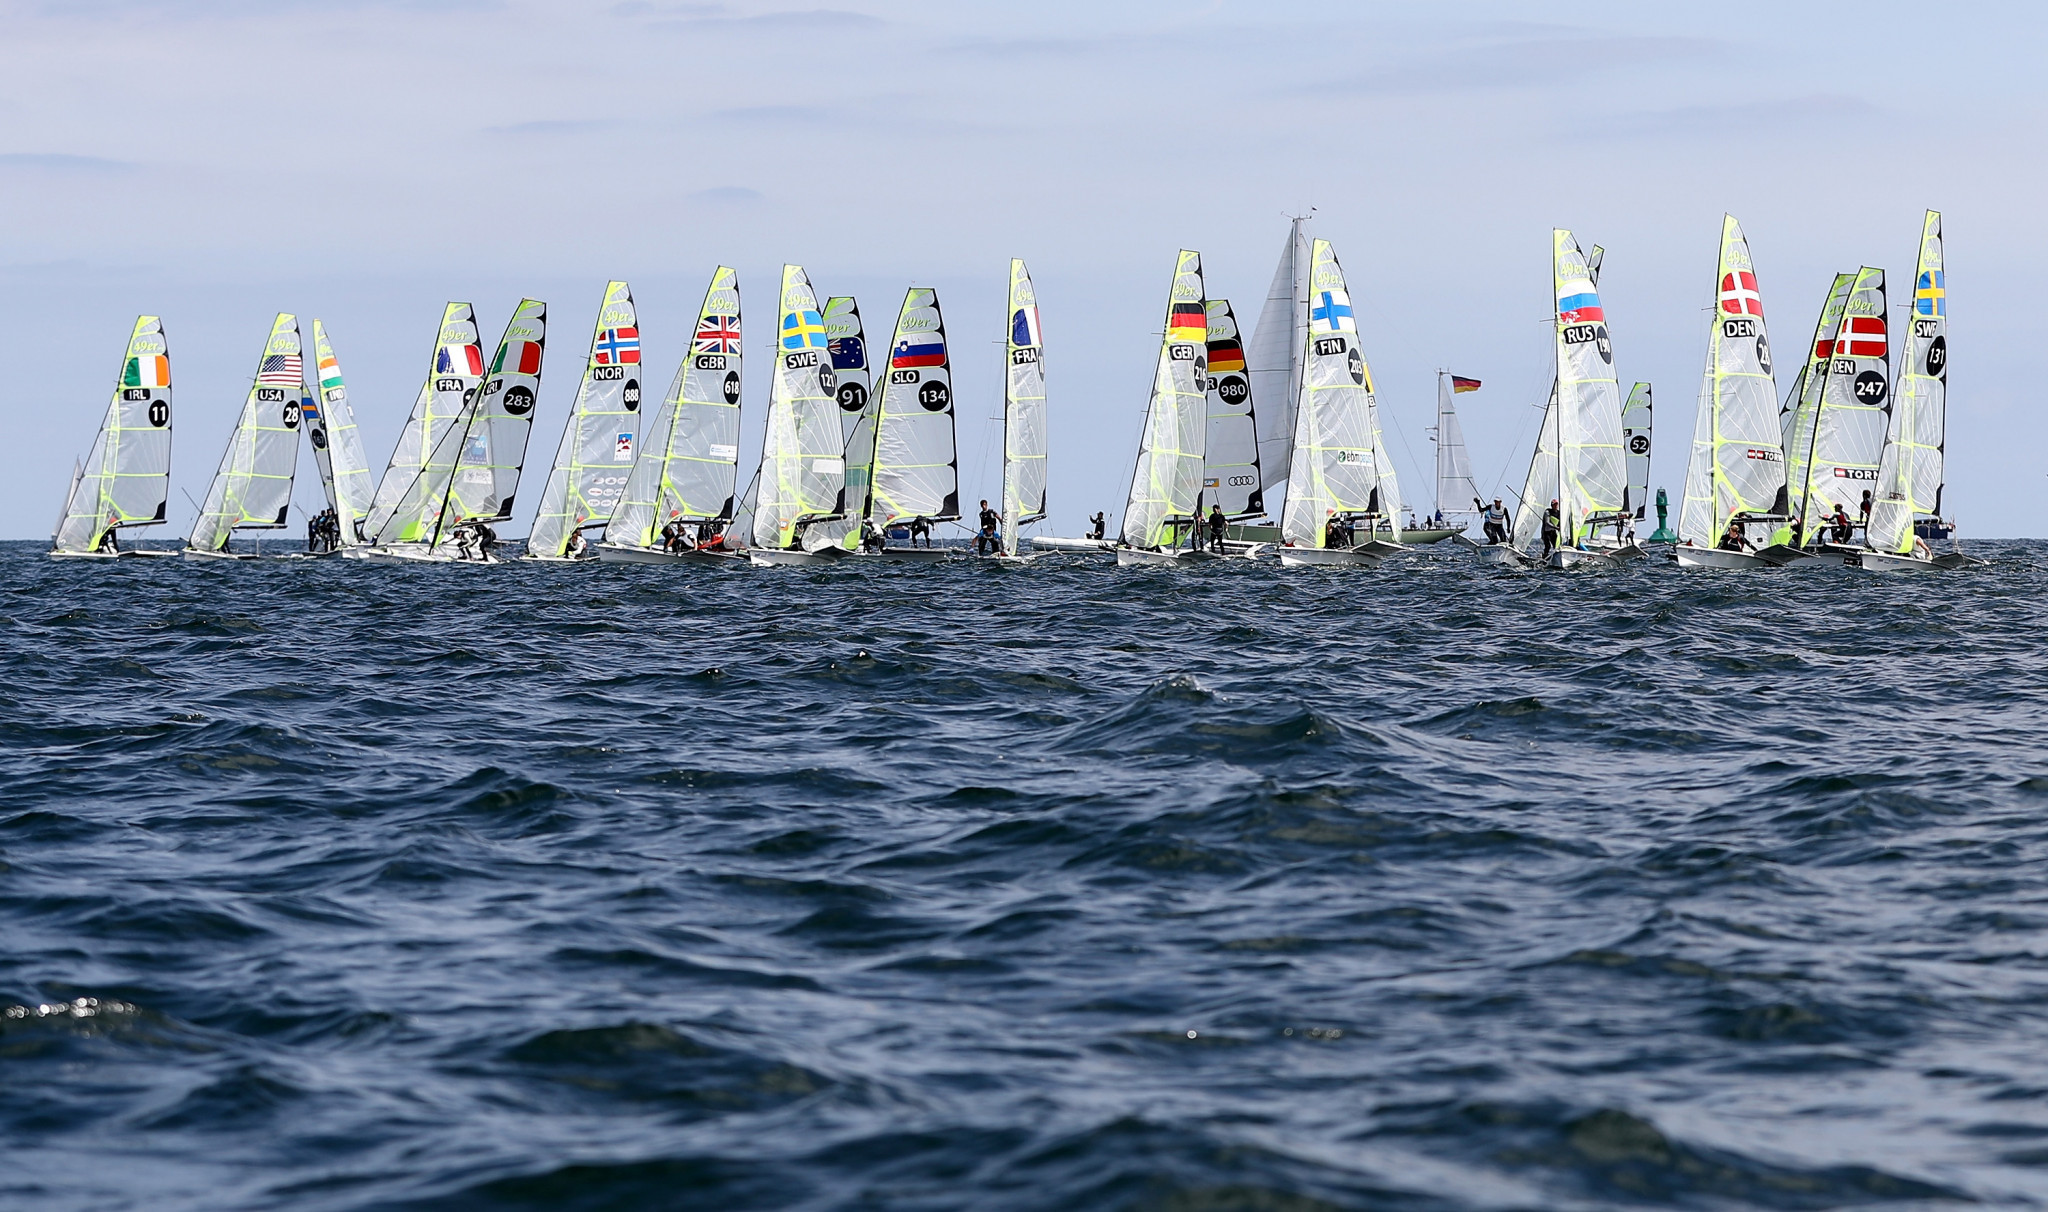 Gdynia is awarded 2018 European Sailing Championships for 49er, 49erFX, and Nacra 17 classes